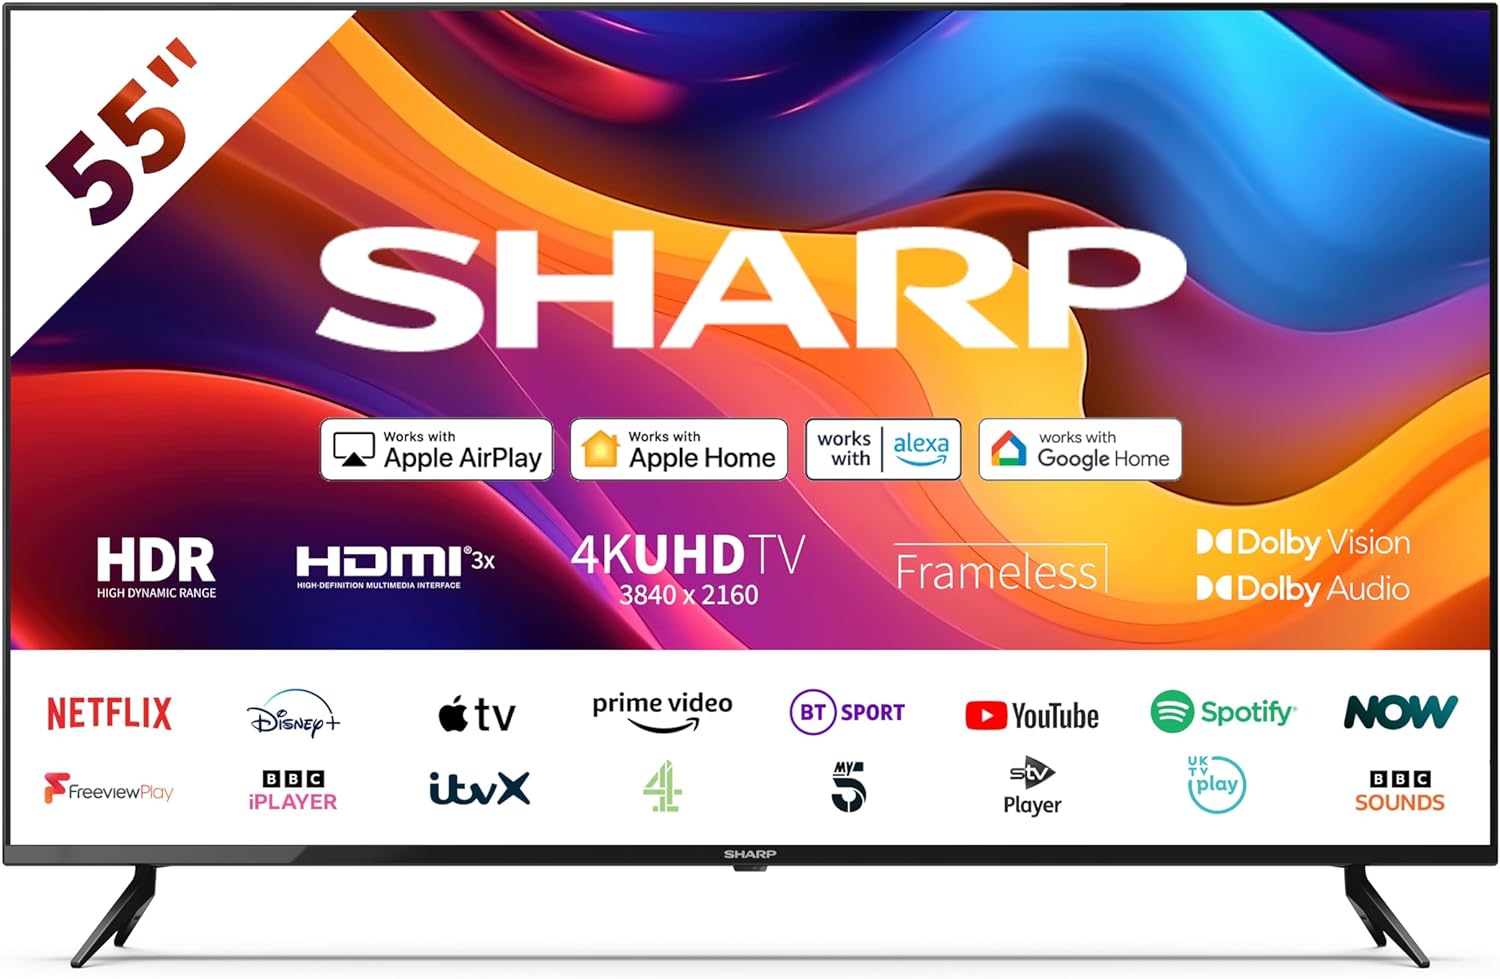 SHARP 40FD6K 40 - Inch Full HD Smart Frameless Roku TV™ in Black with Active Motion 200, HDR10 Support, Freeview Play, Pre - Installed Apps, 3x HDMI & 1x USB - Amazing Gadgets Outlet